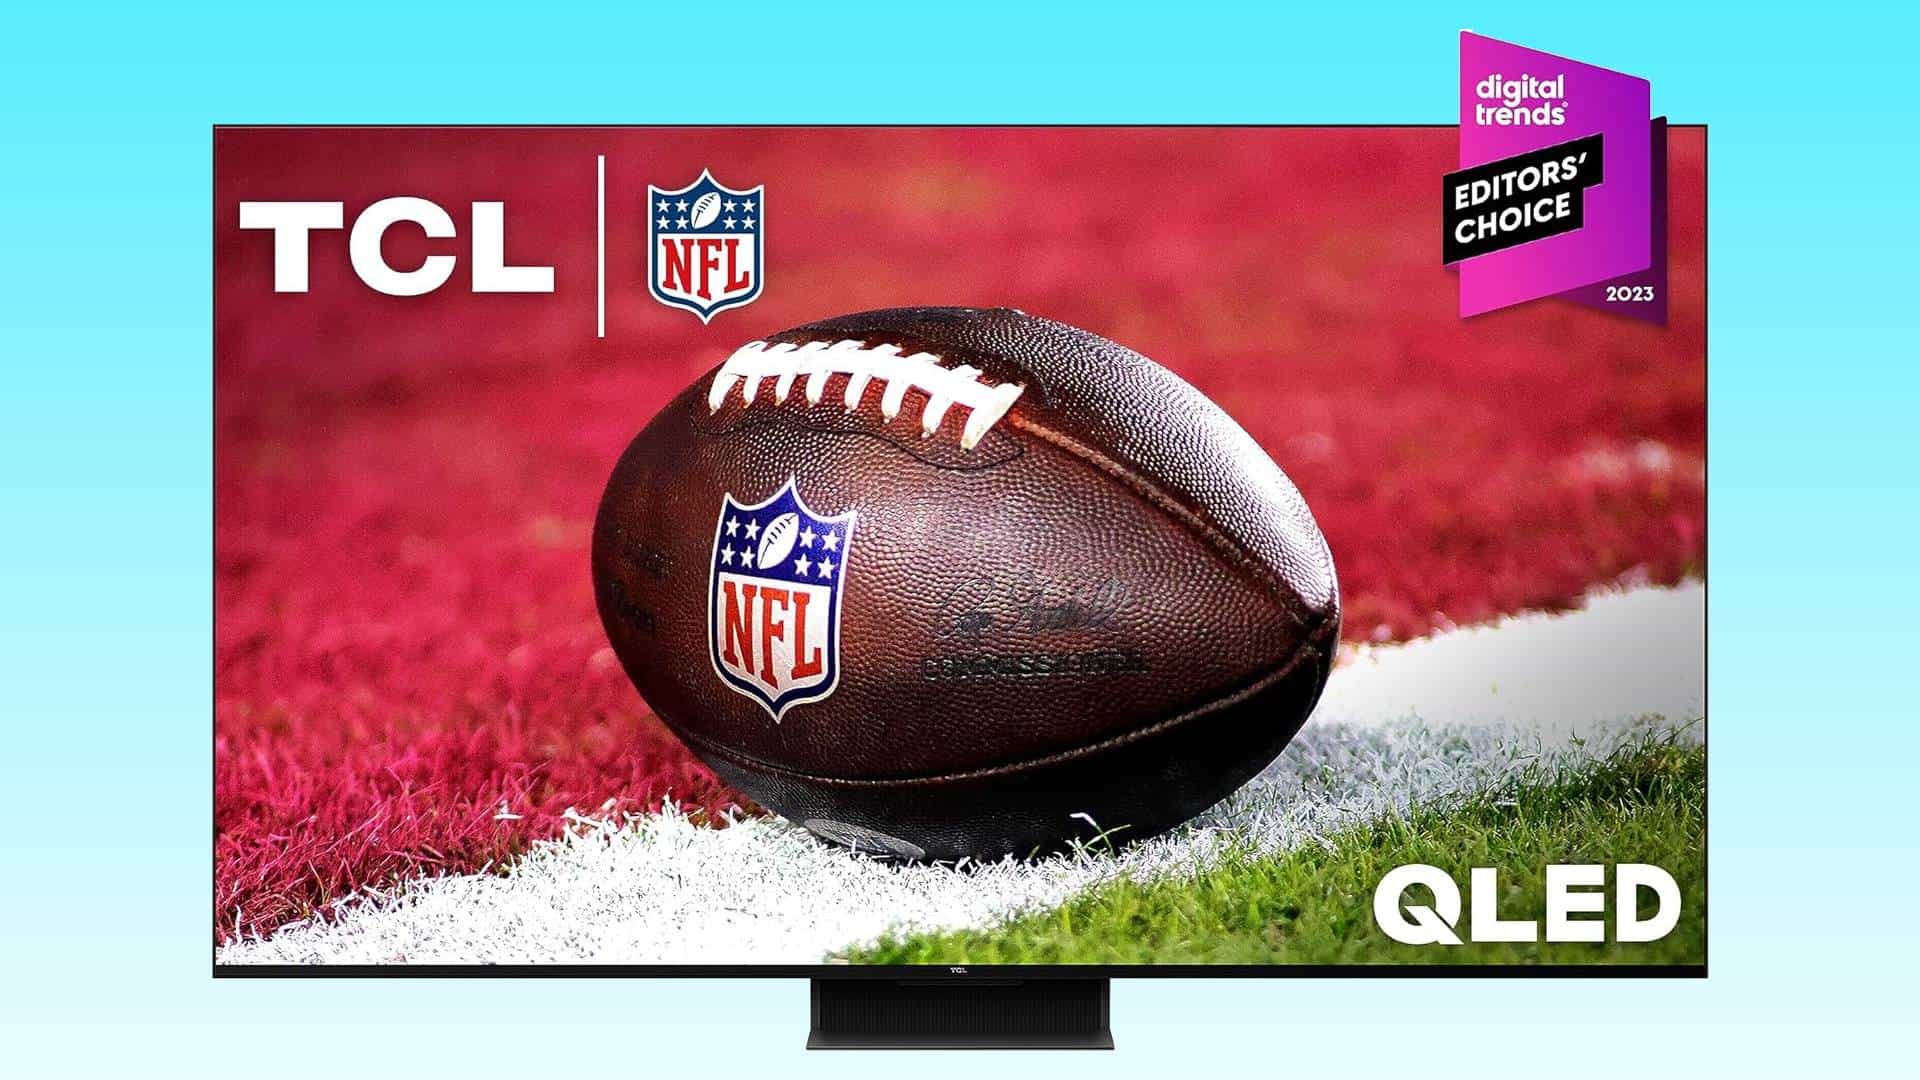 A close-up image of an NFL football on a TV screen display, representing a 75 inch TCL QLED TV, with a digital emblem reading "Editor's Choice 2023".